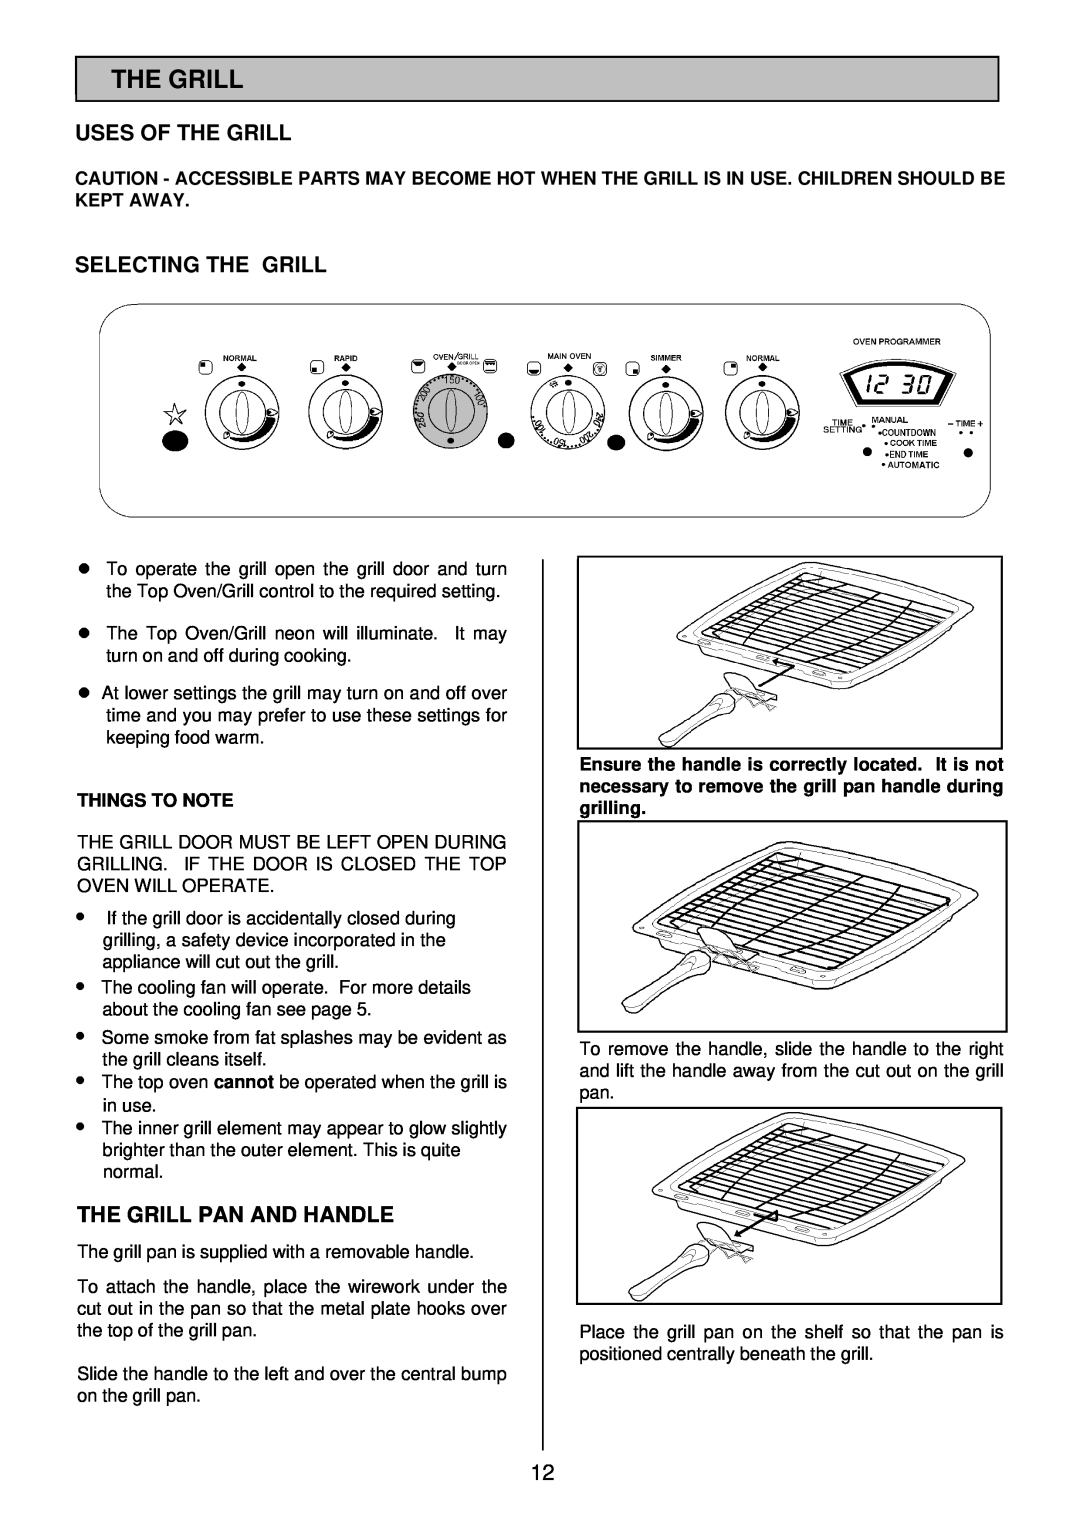 Electrolux SIM 533 installation instructions Uses Of The Grill, Selecting The Grill, The Grill Pan And Handle 